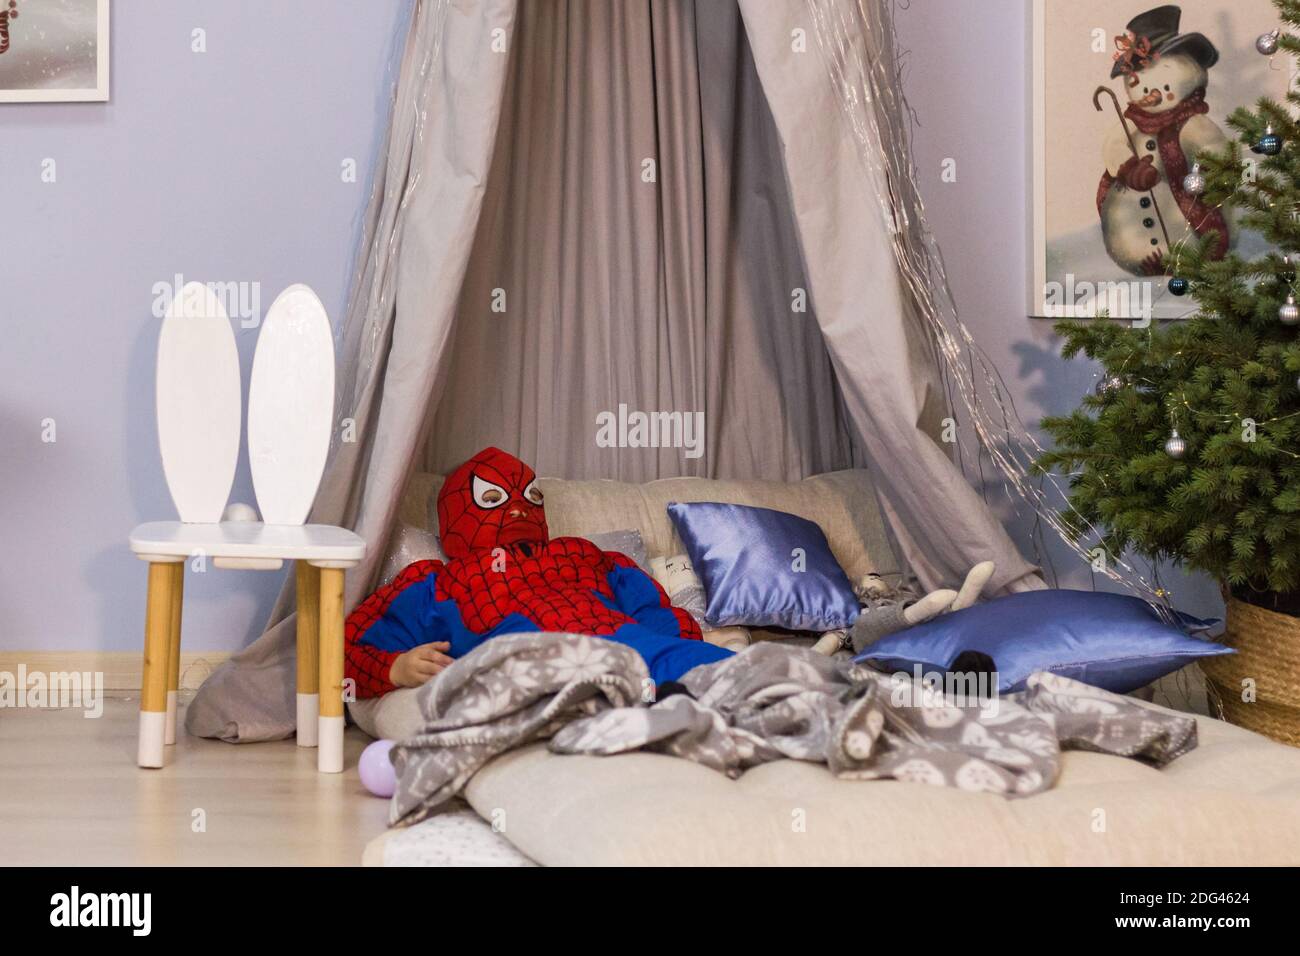 A tired child dressed in a Spiderman costume with mask is lying on a bed with canopy and pillows near a Christmas tree Stock Photo